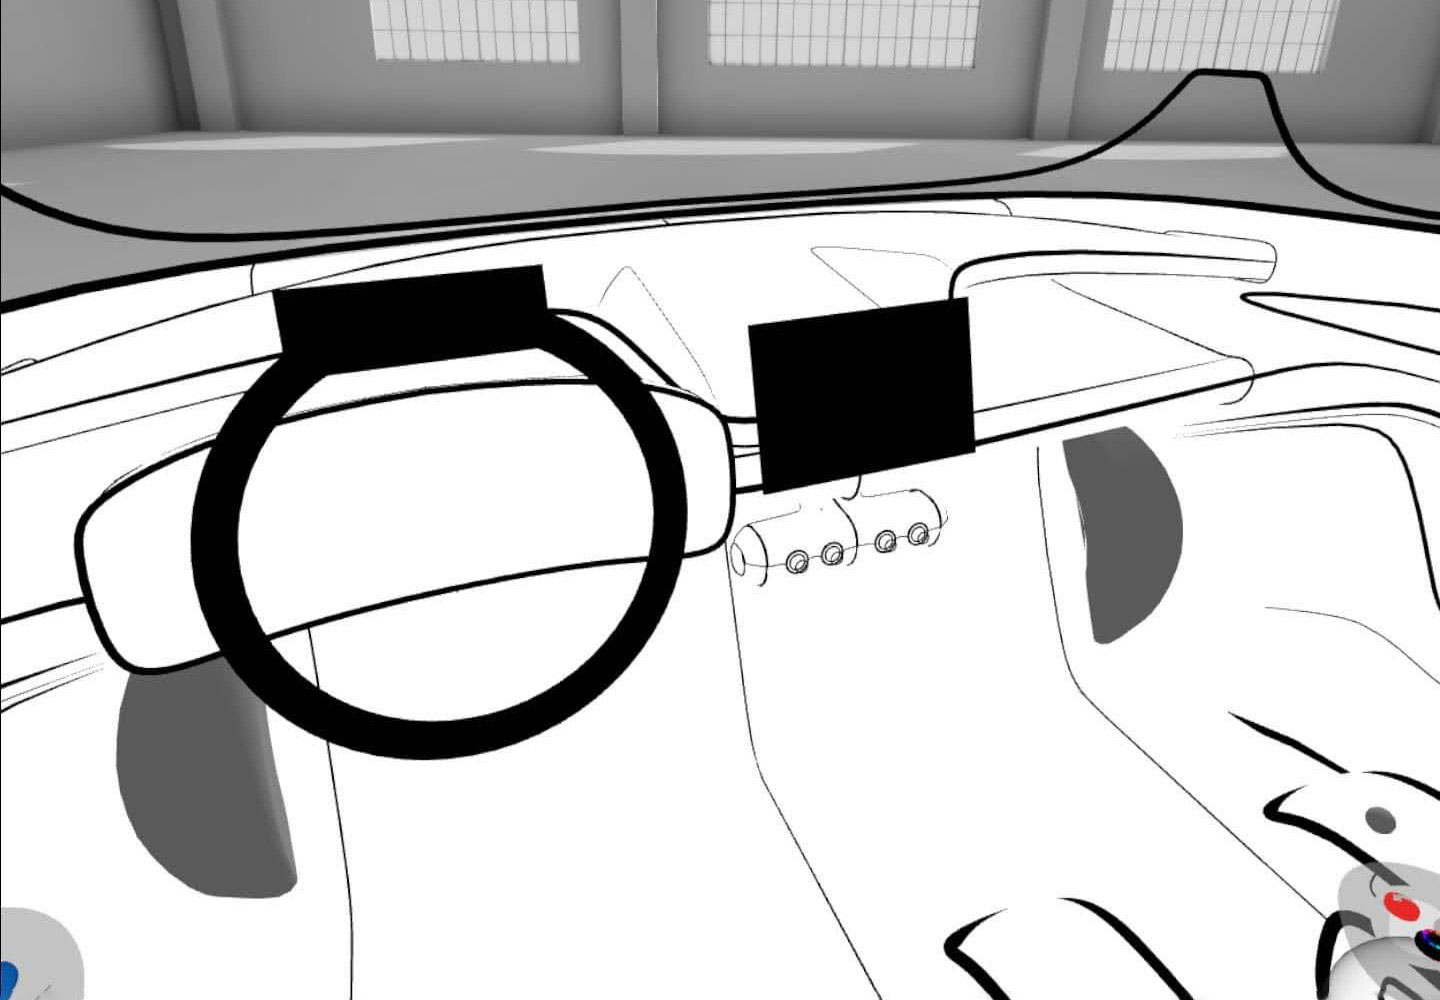 image of a car interior design inside the Gravity Sketch virtual reality environment